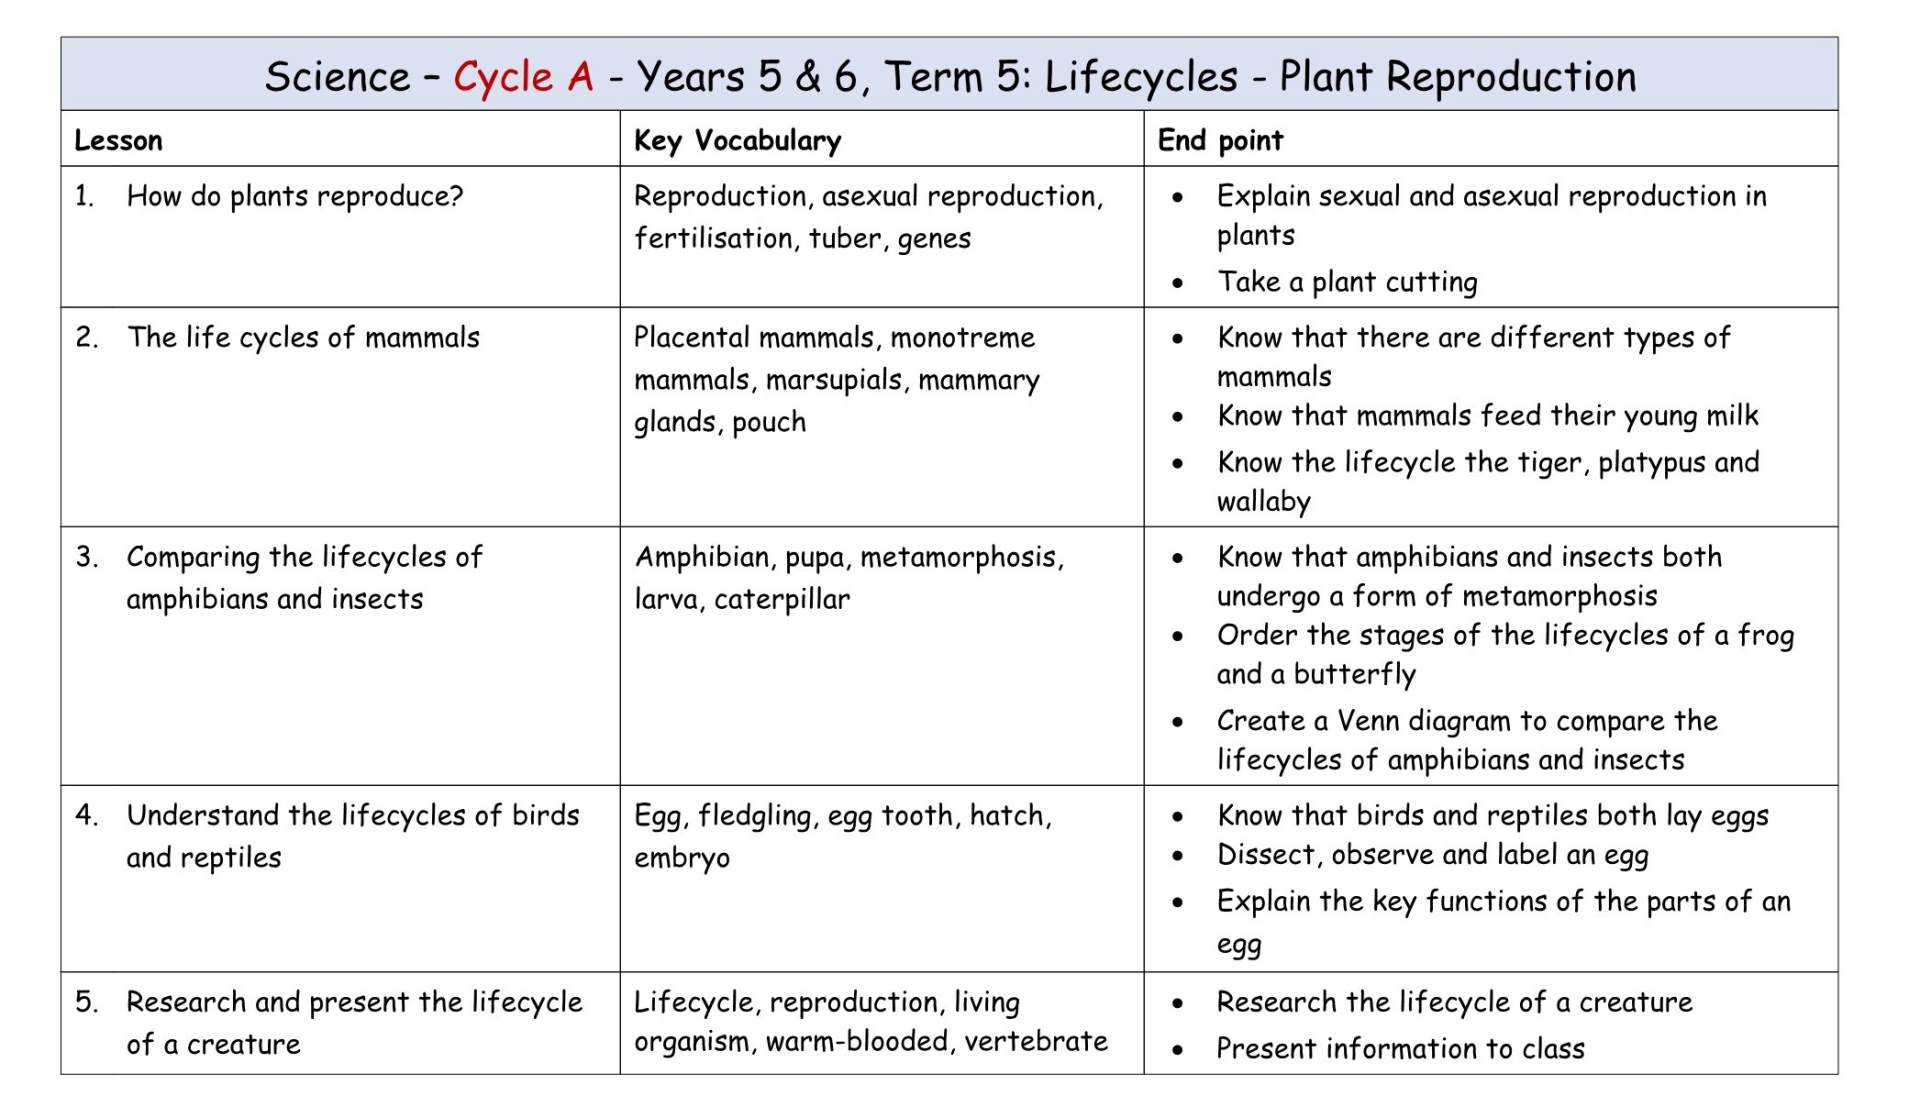 Science Y5-6 Cycle A T5